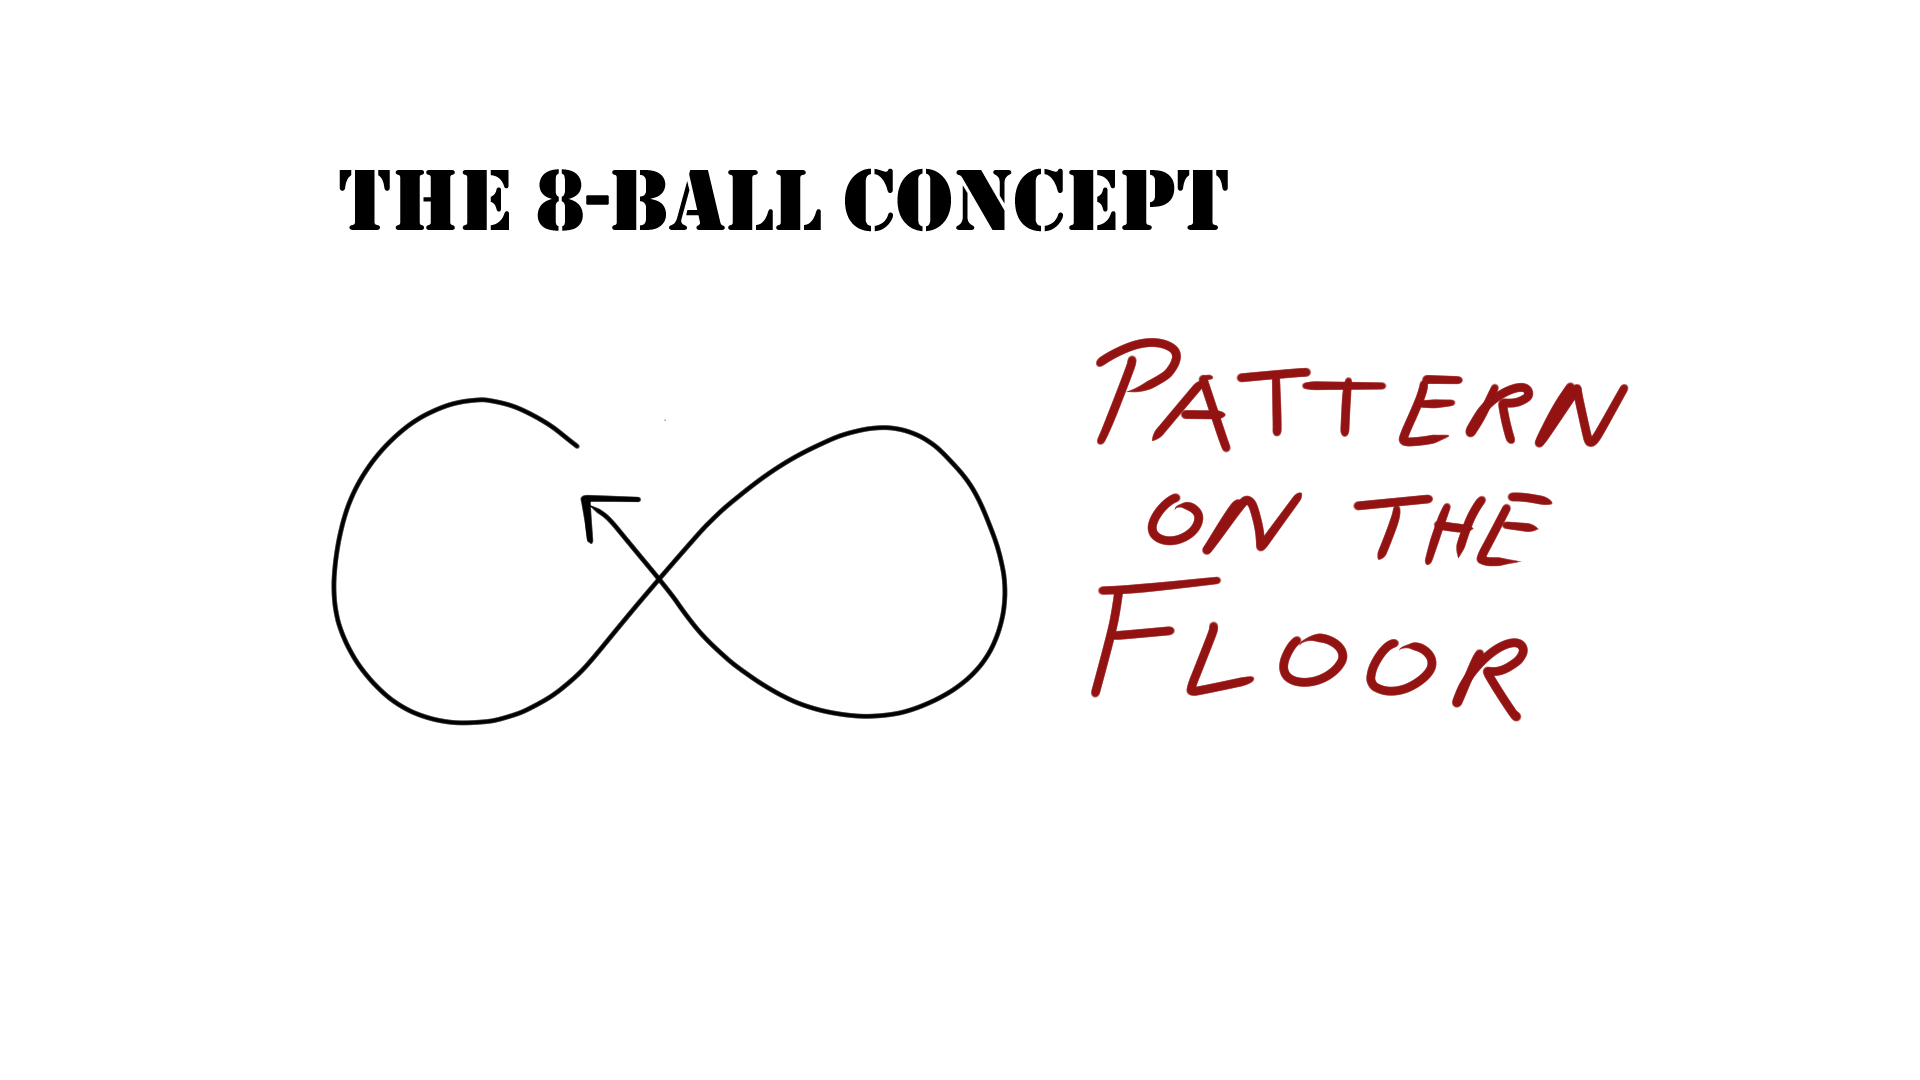 sketch of a figure 8 pattern on the floor